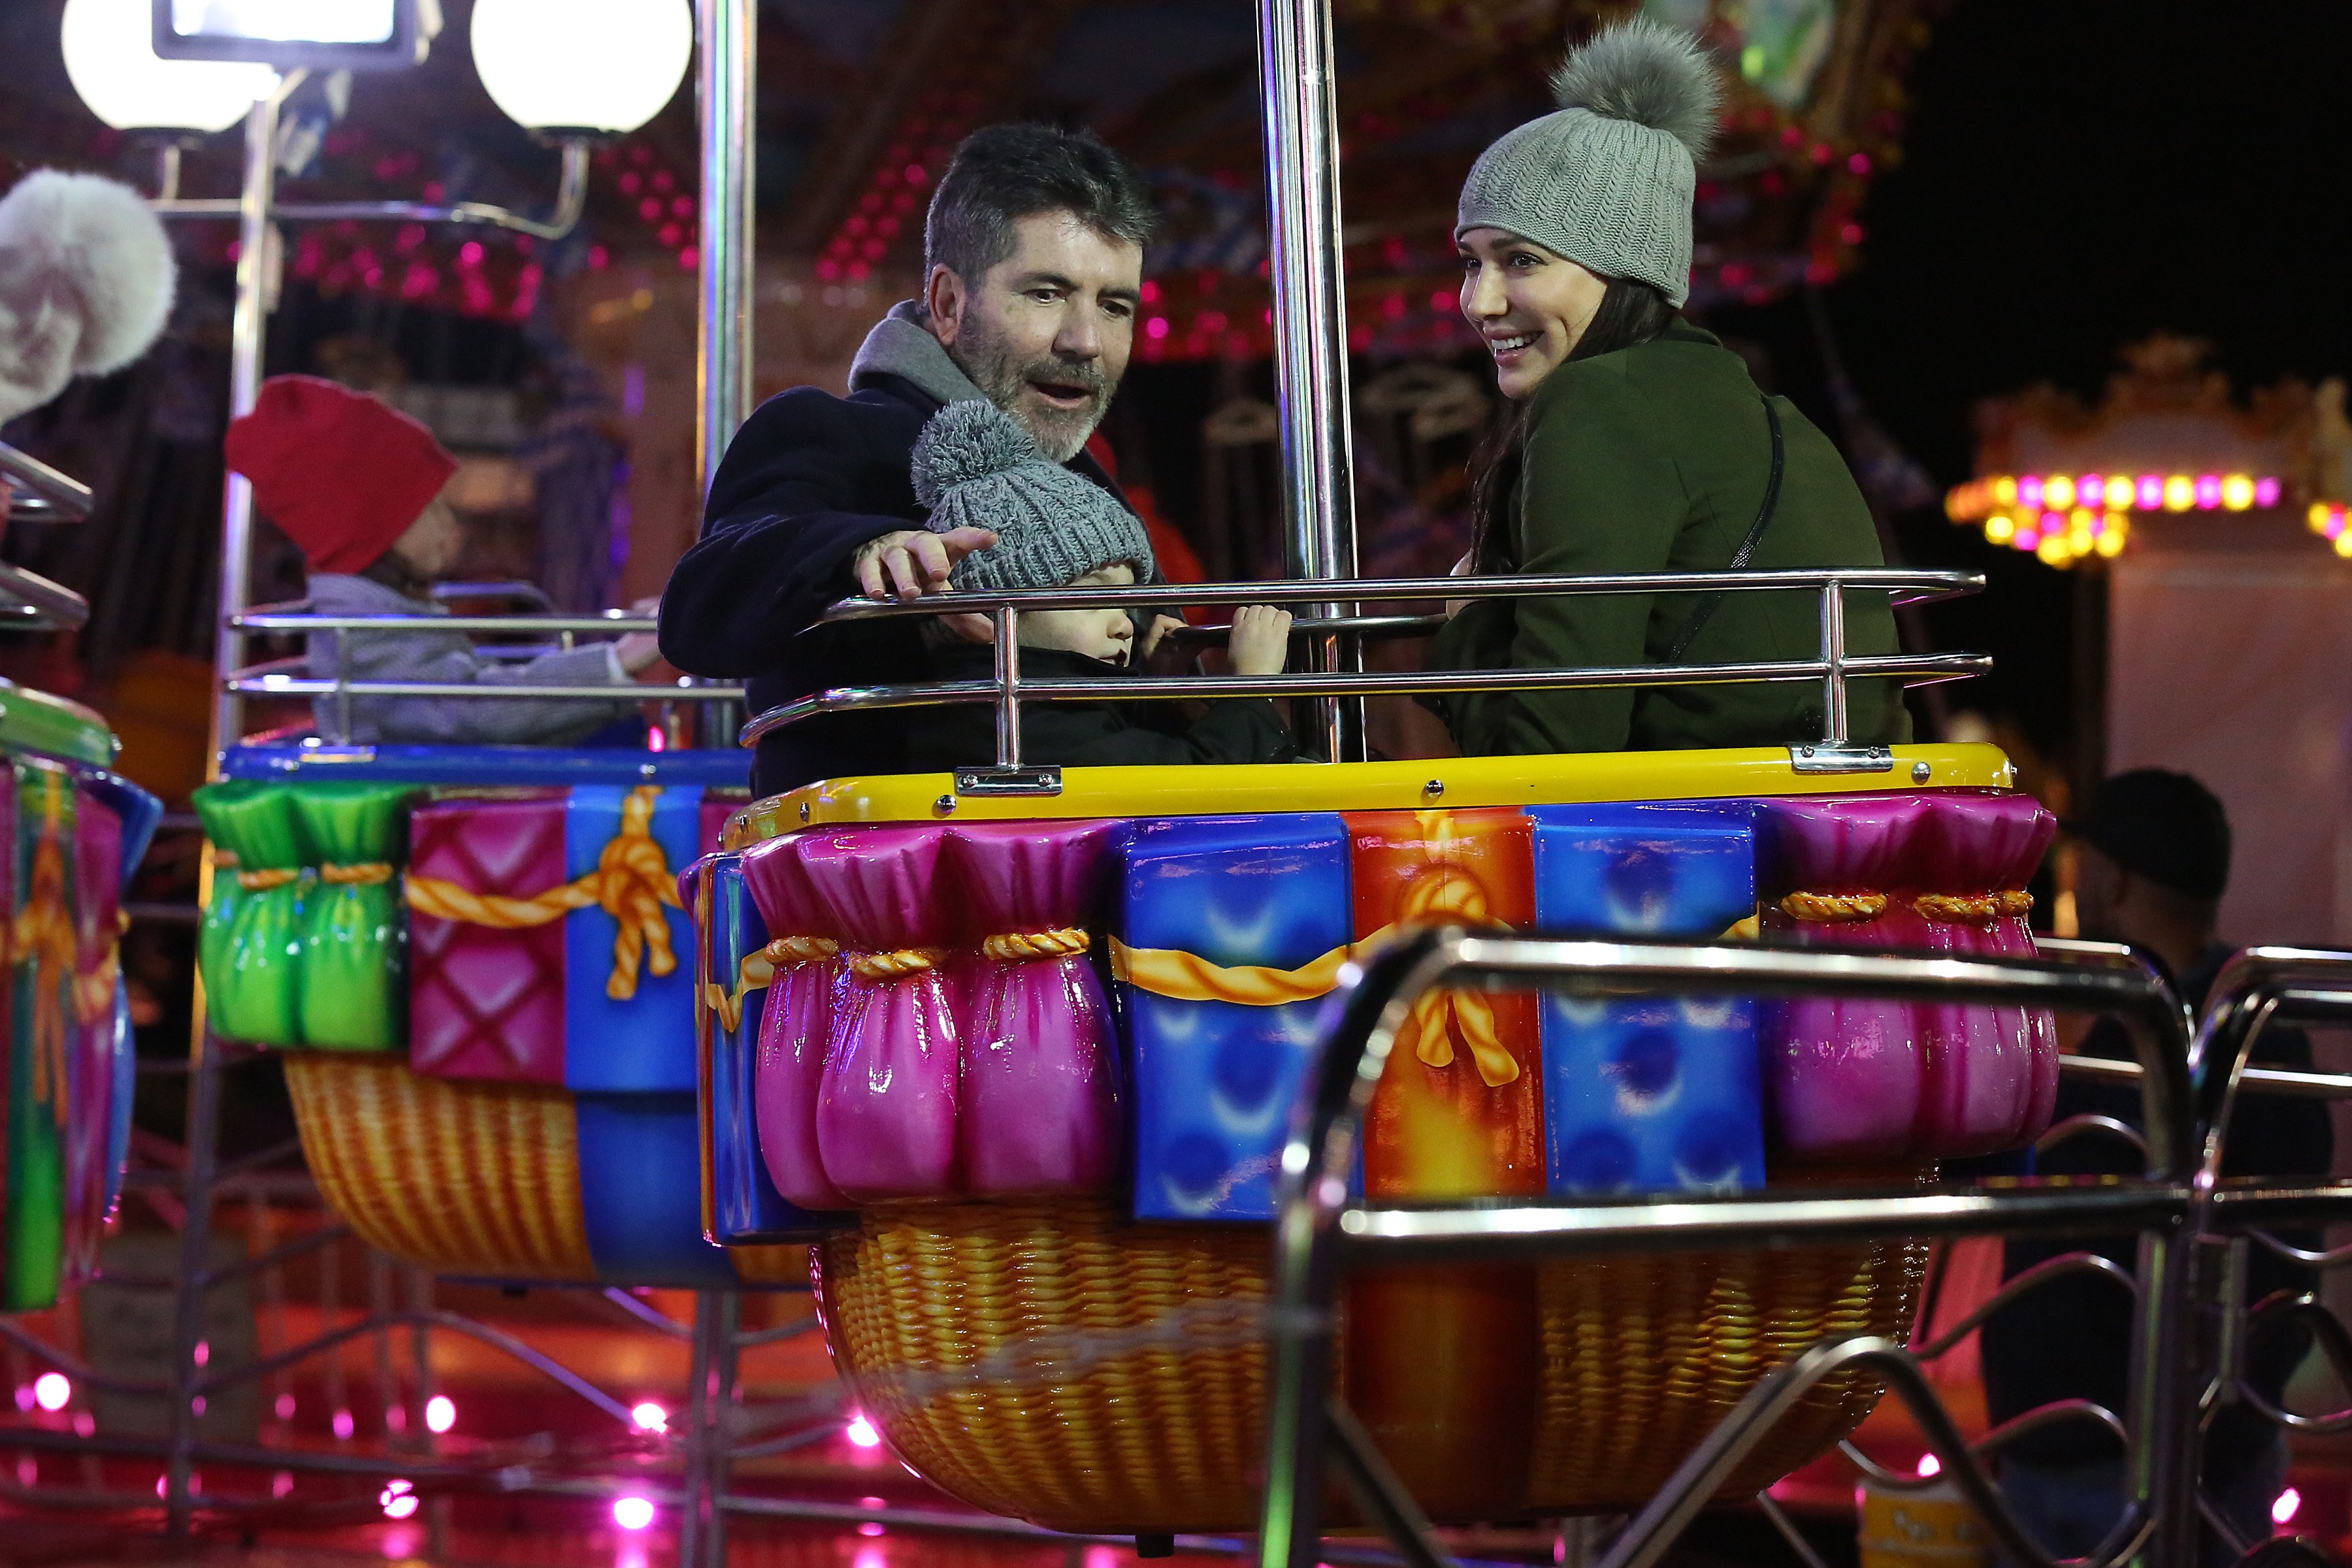  Simon Cowell, Eric Cowell and Lauren Silverman seen at Hyde Park Winter Wonderland on November 17, 2016 in London, England | Source: Getty Images 